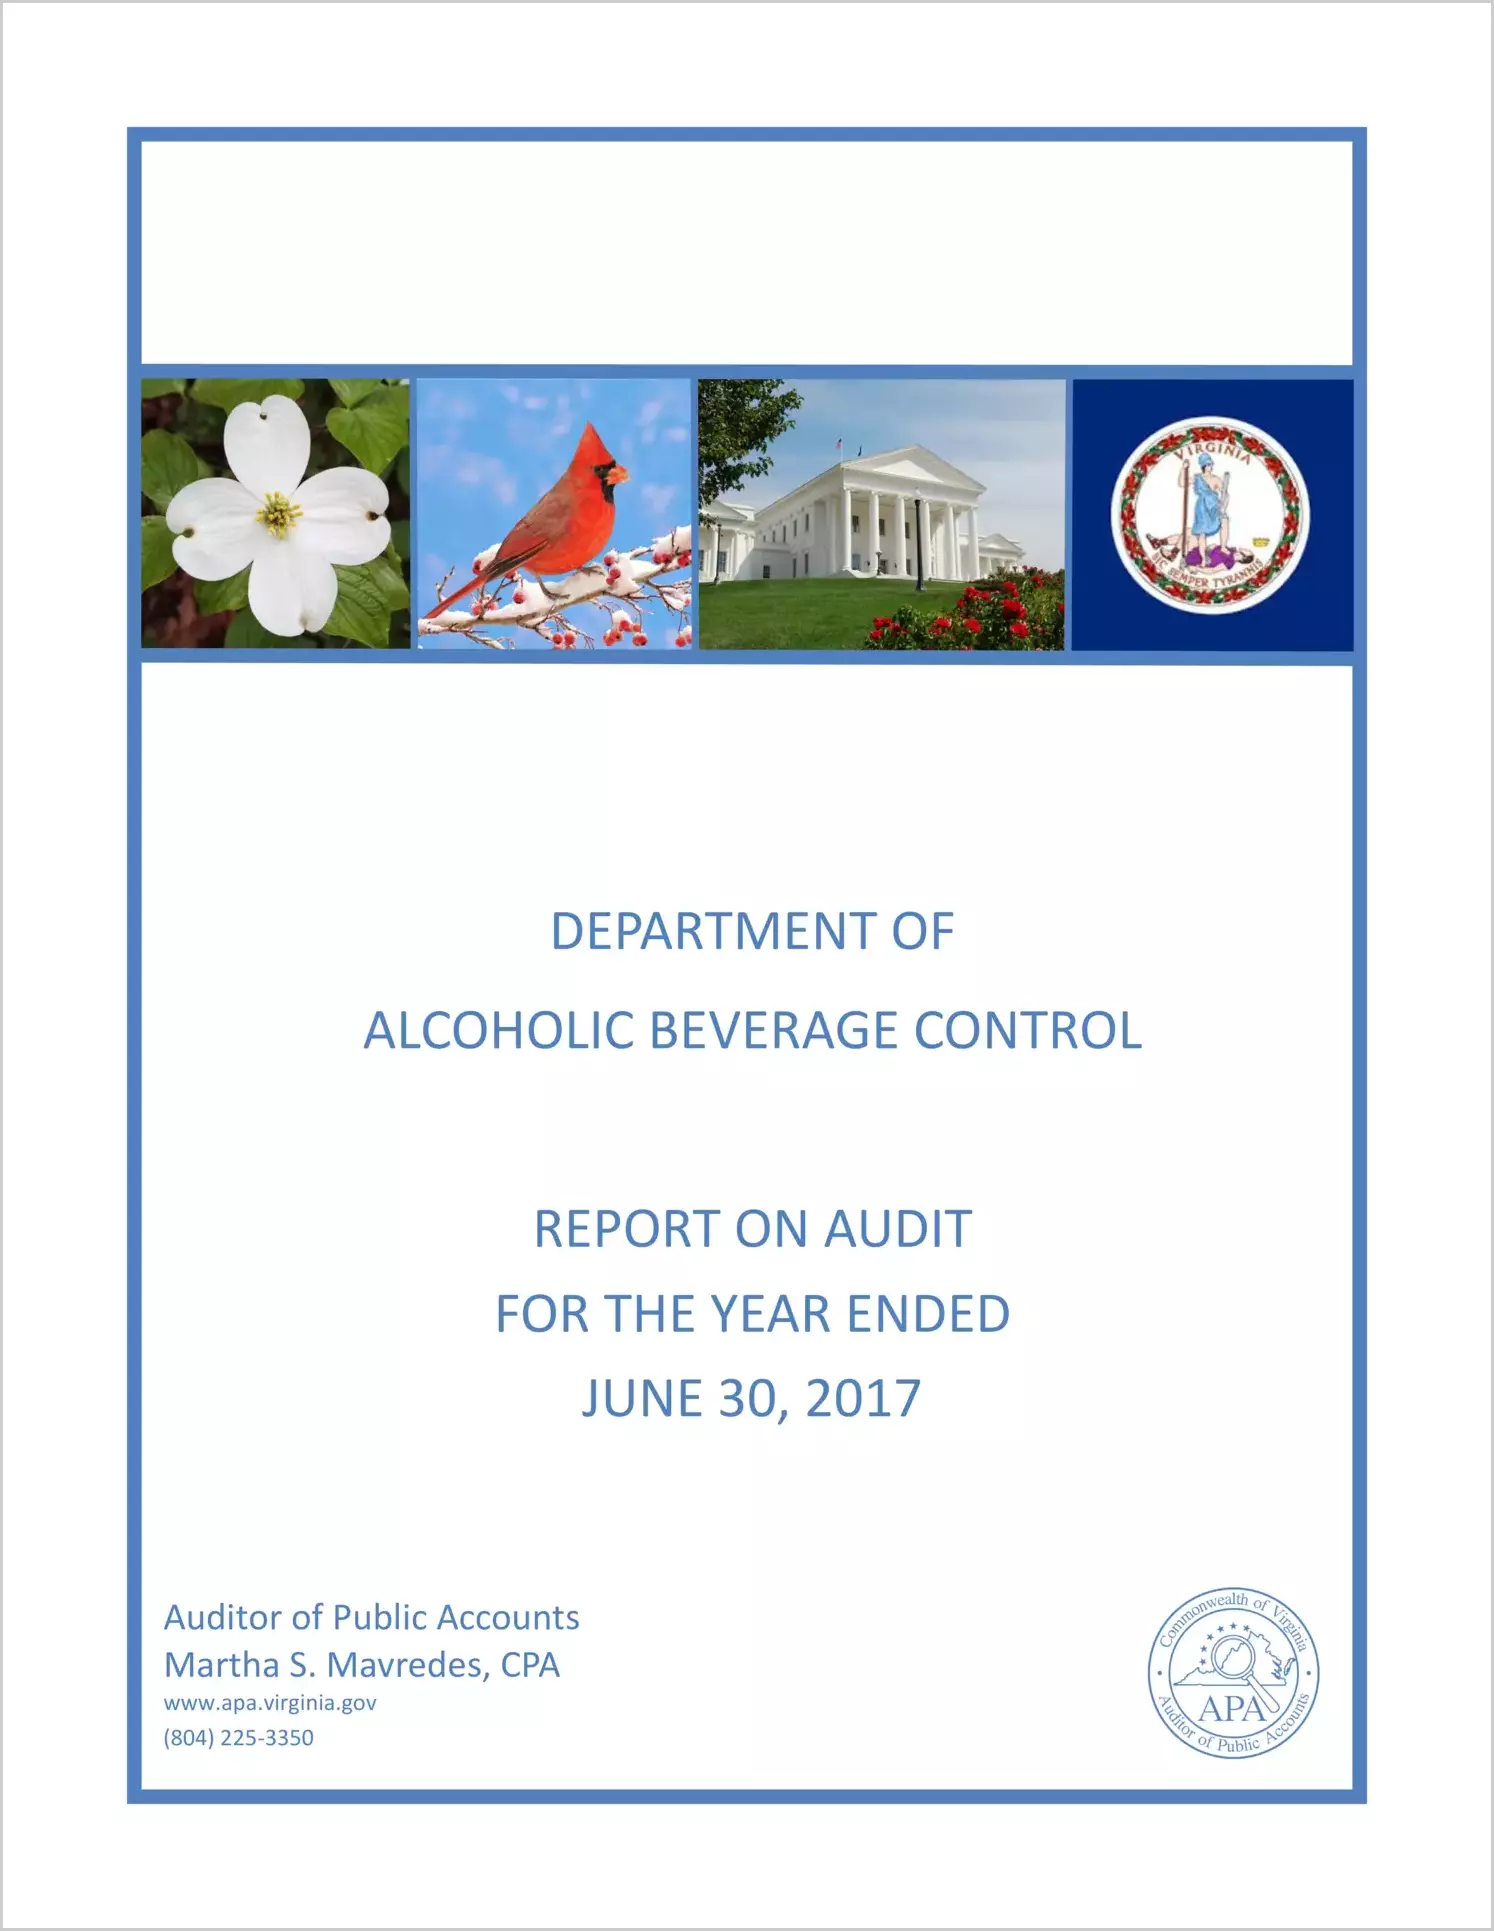 Department of Alcoholic Beverage Control for the year ended June 30, 2017